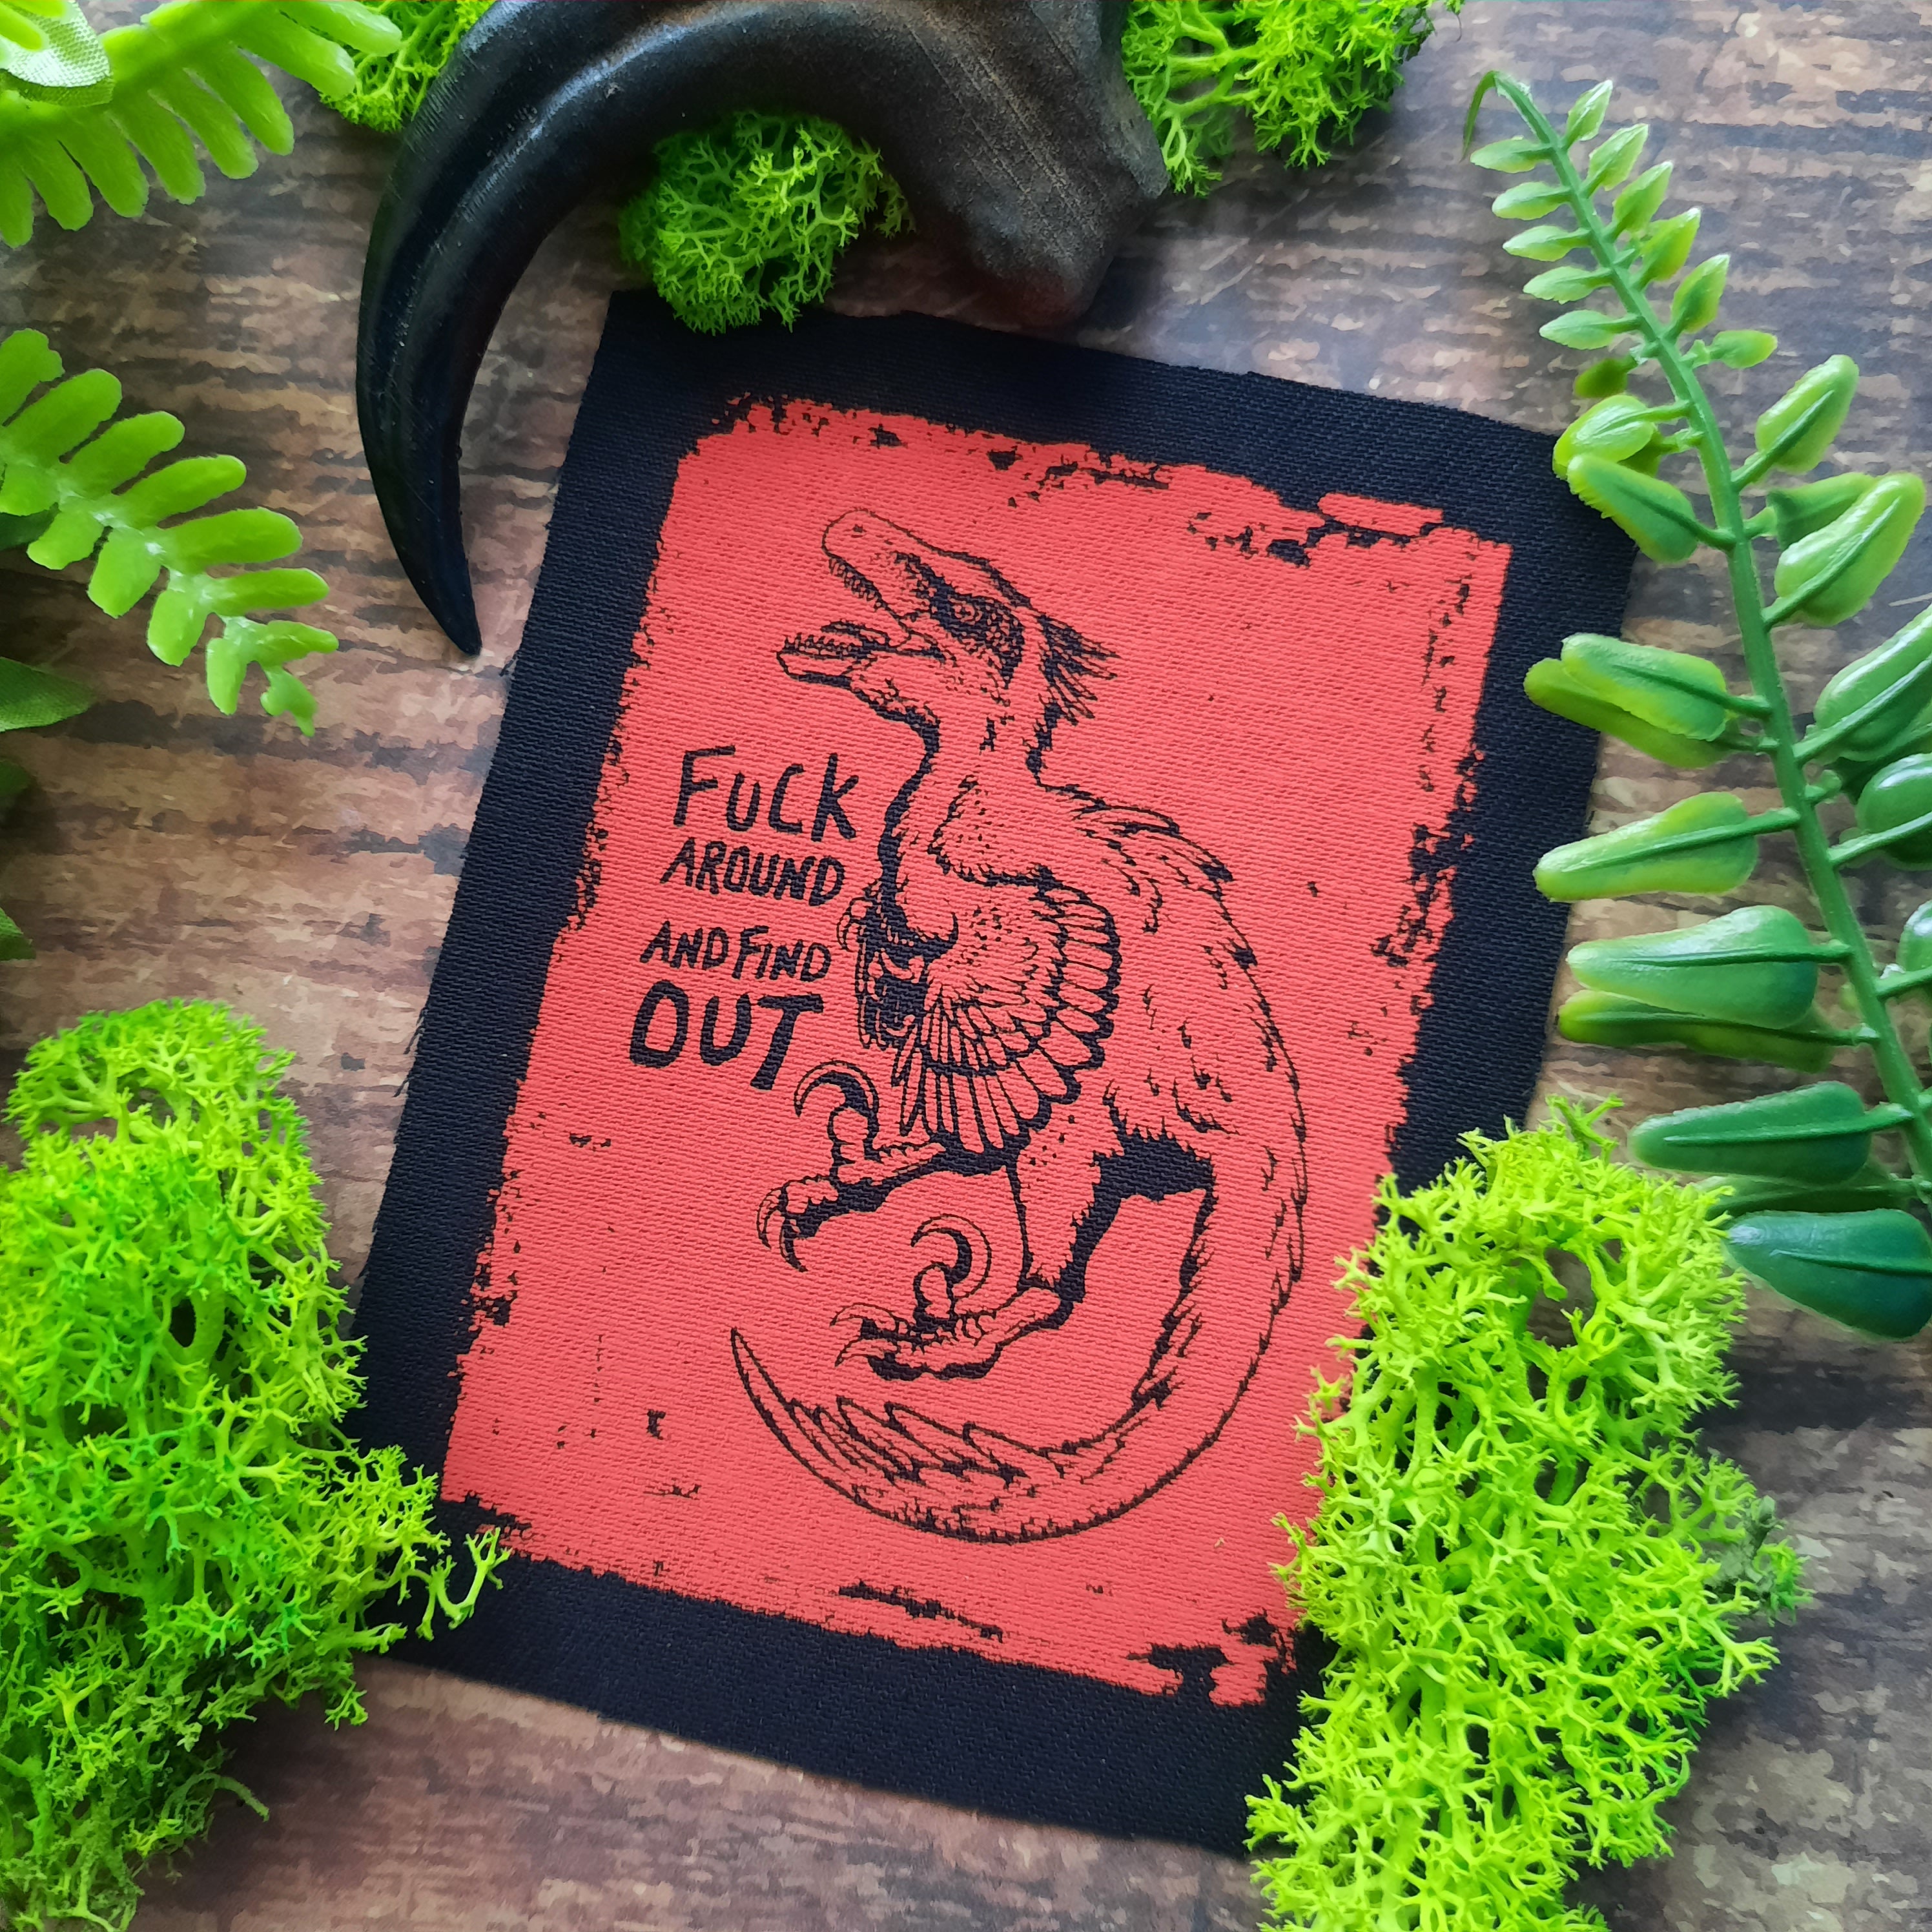 FAFO F**k Around and Find Out MORALE PATCH, GLOW DARK Hook Backing 3x2